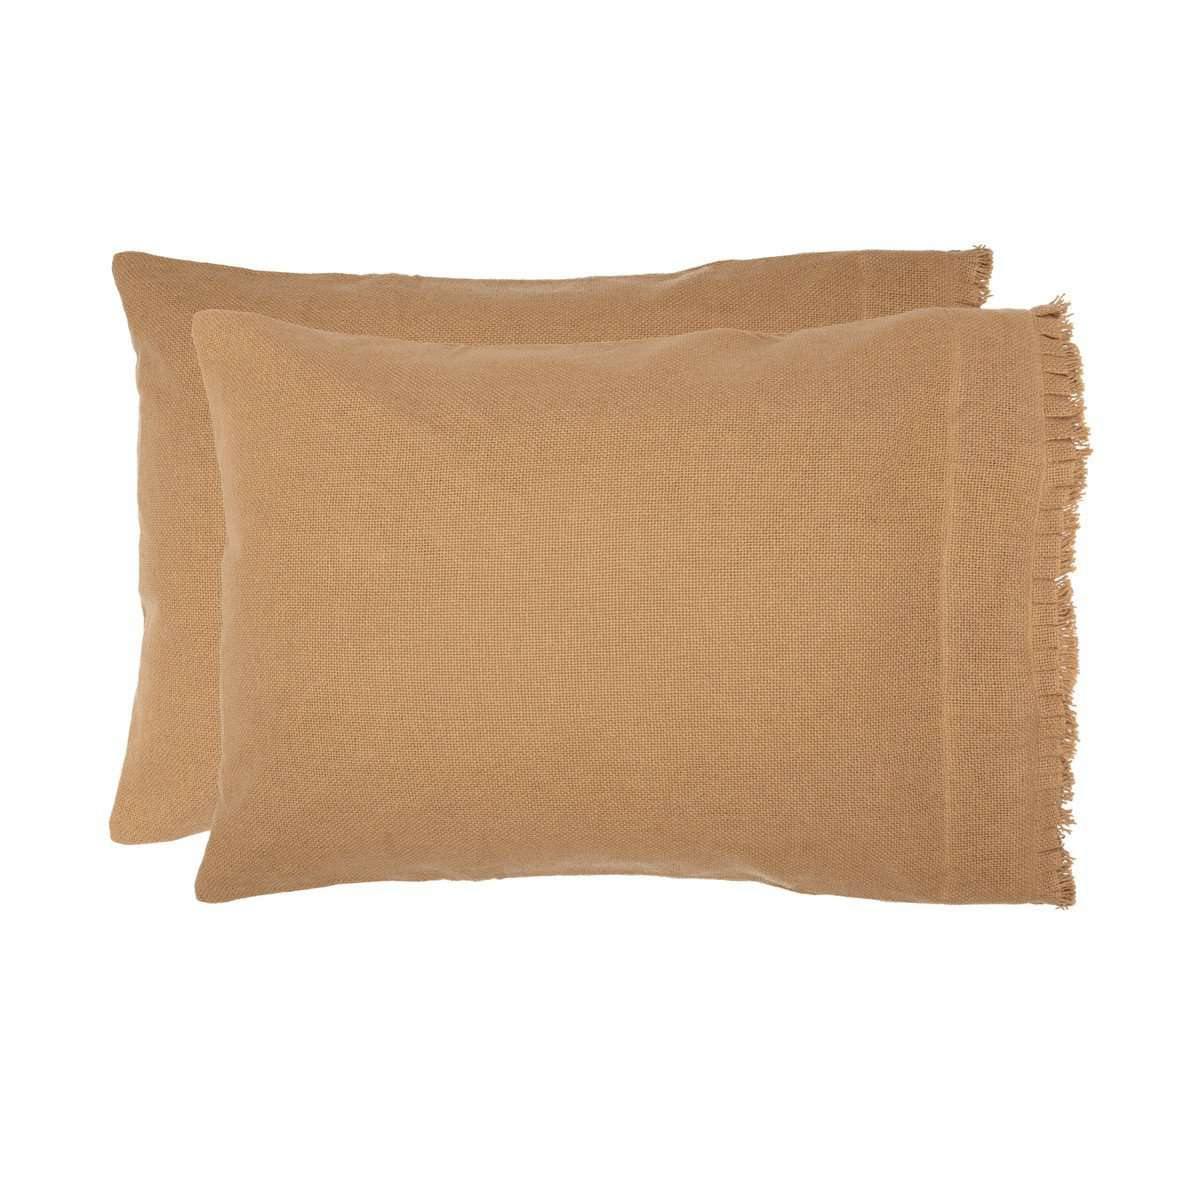 Burlap Natural Standard Pillow Case w/ Fringed Ruffle Set of 2 21x30 VHC Brands - The Fox Decor